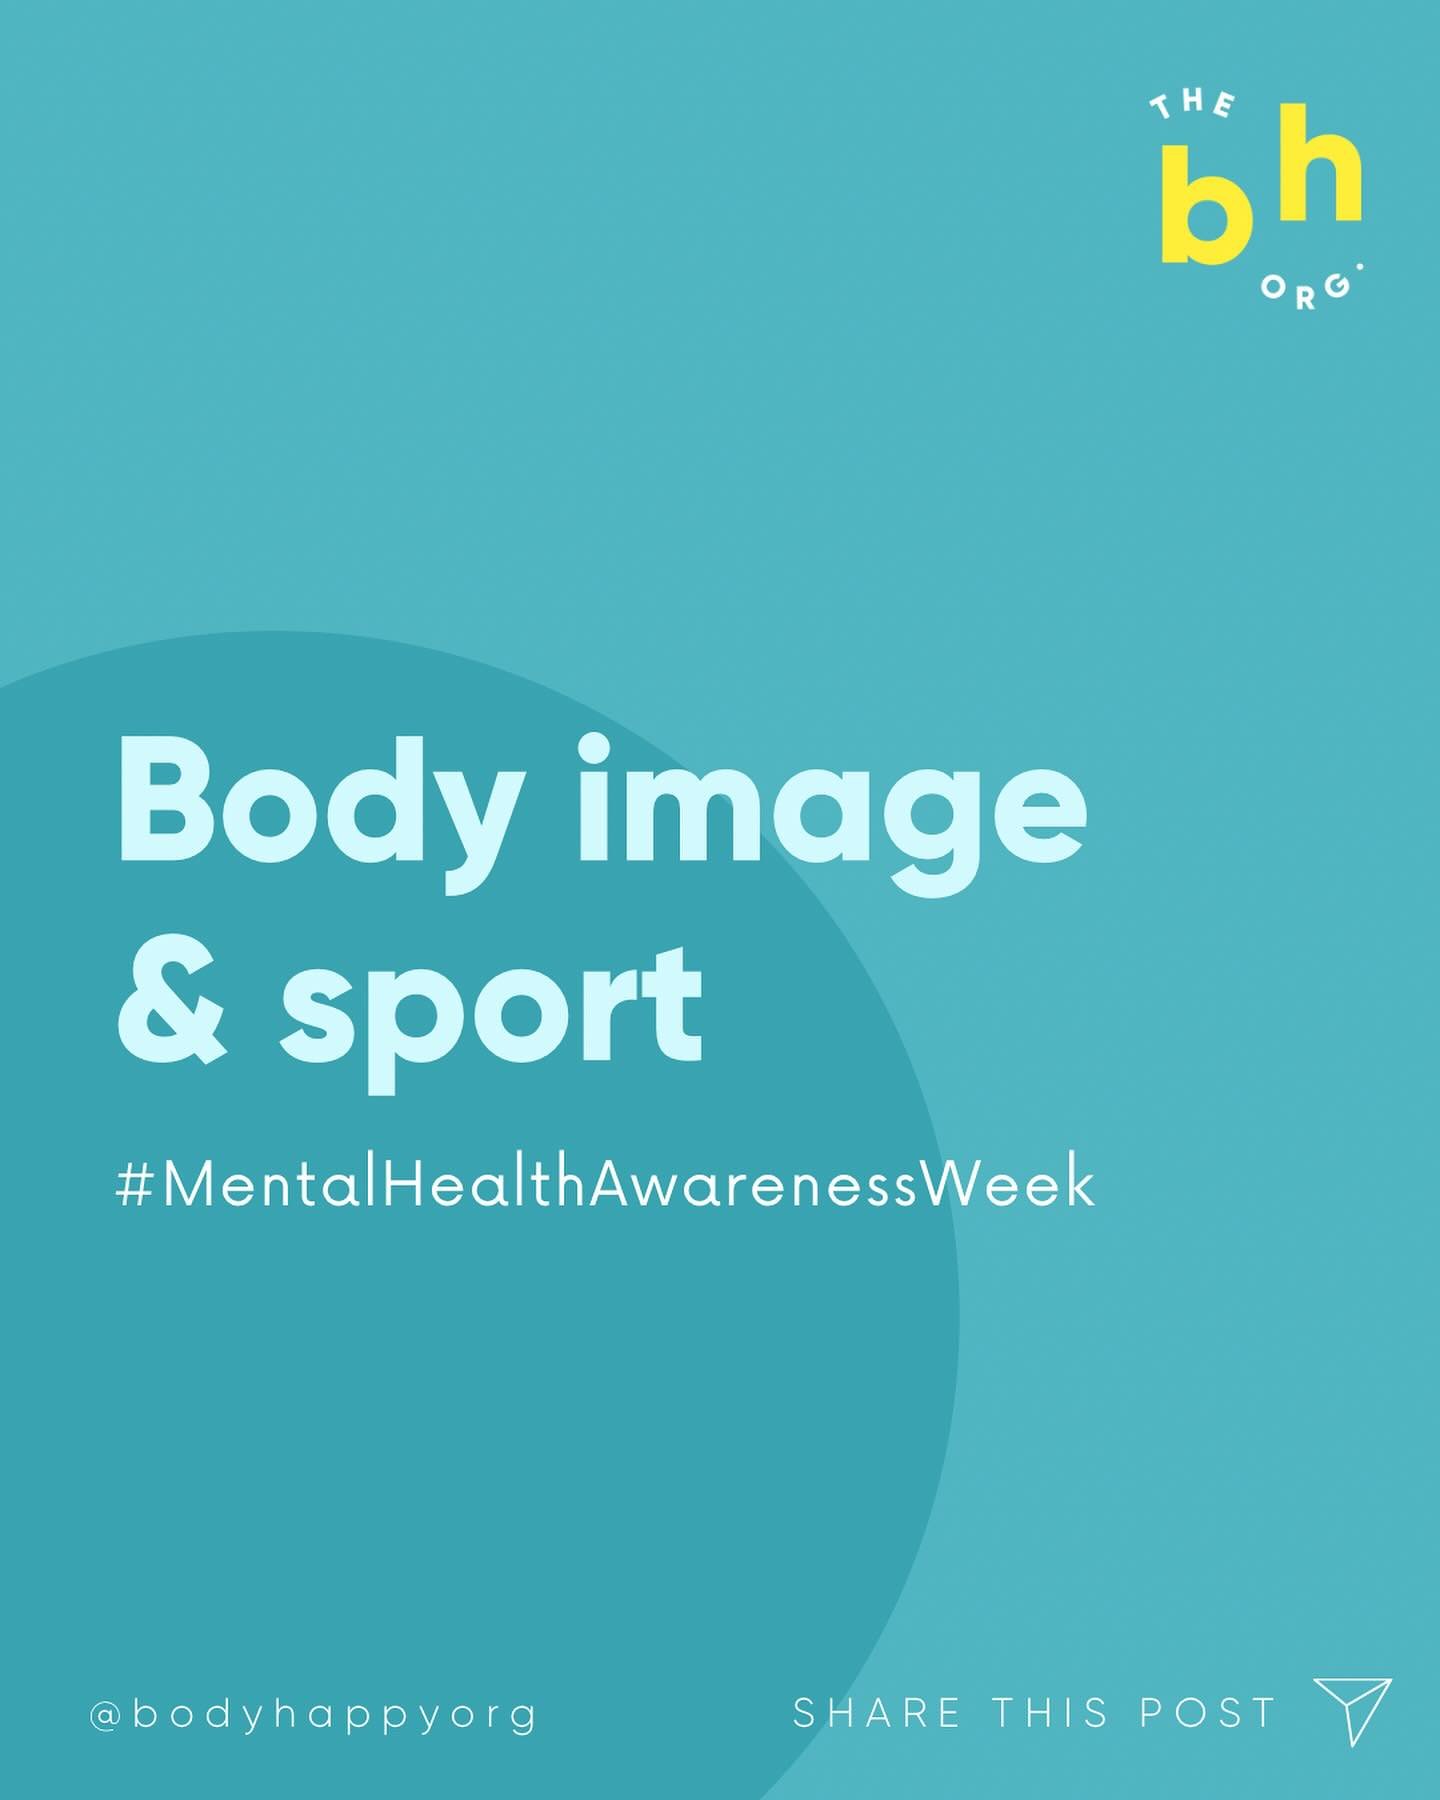 It&rsquo;s #MentalHealthAwarenessWeek so here is our regular reminder that body image is a mental health issue ⚡

SAVE 💡this post for later if you don&rsquo;t have time to read it now

This year&rsquo;s theme is &ldquo;moving more for our mental hea